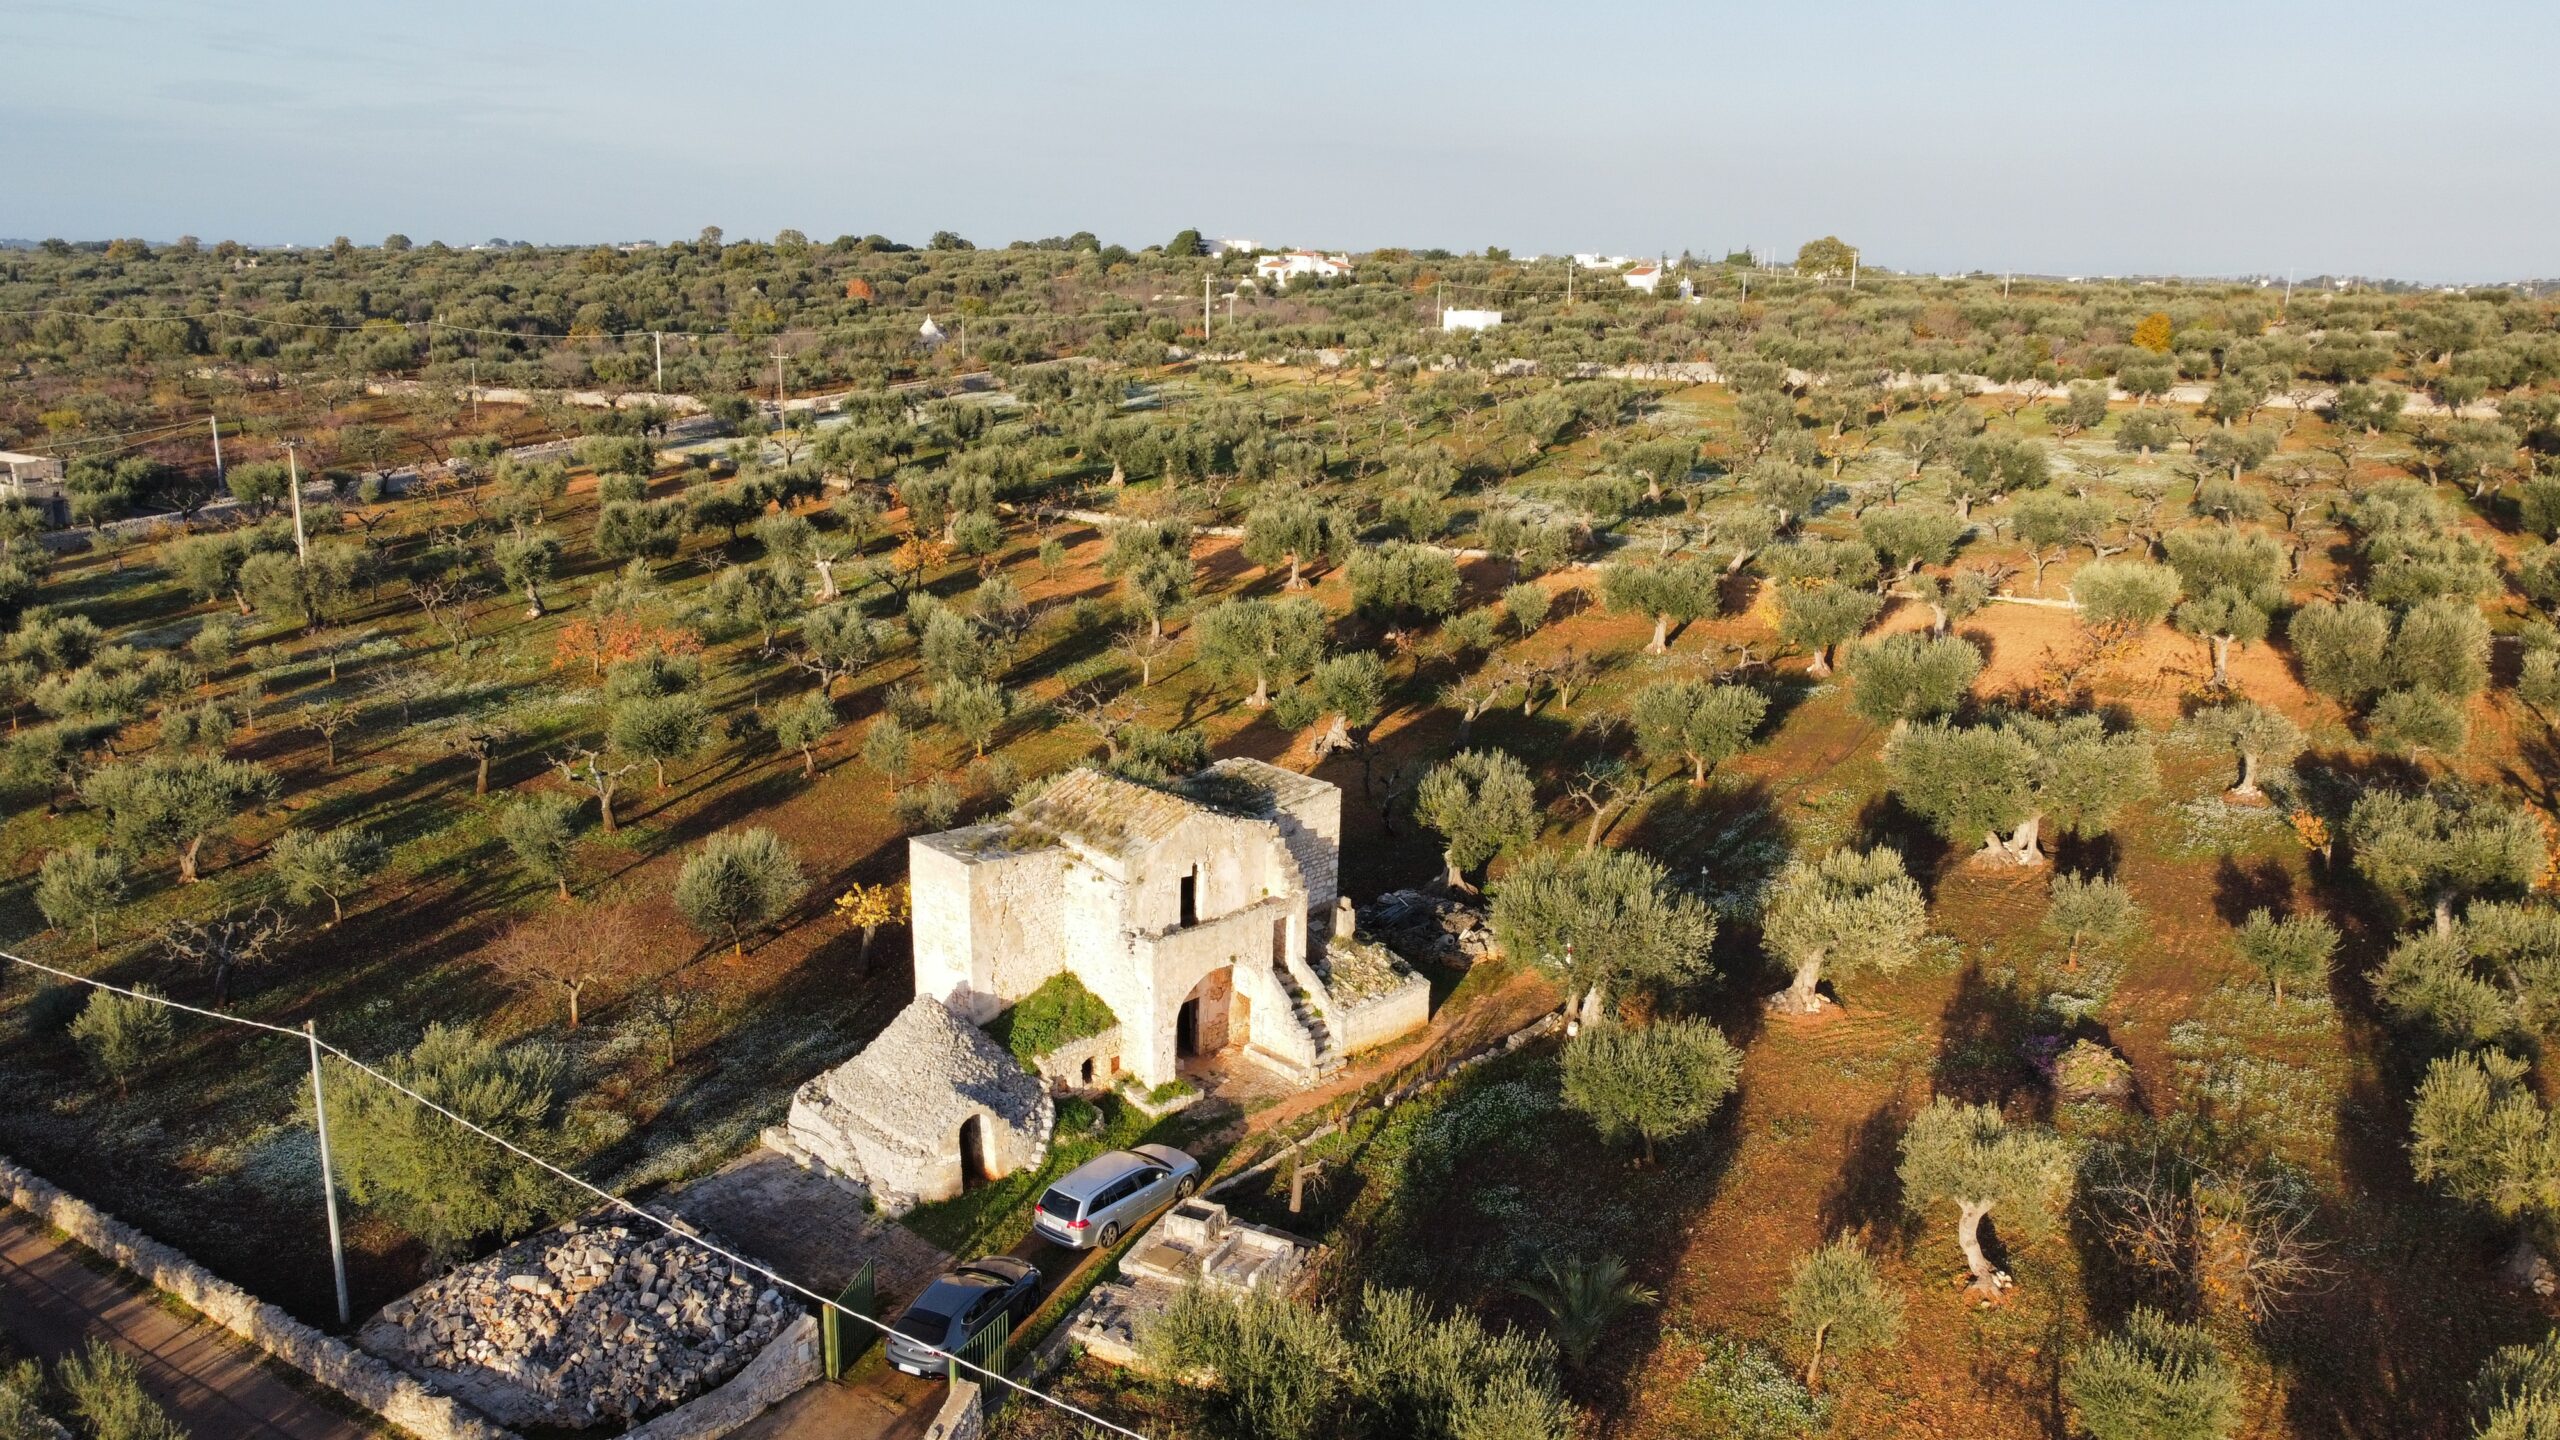 Renovation of a typical historic apulian rural house - Castellana Grotte (BA) - under construction